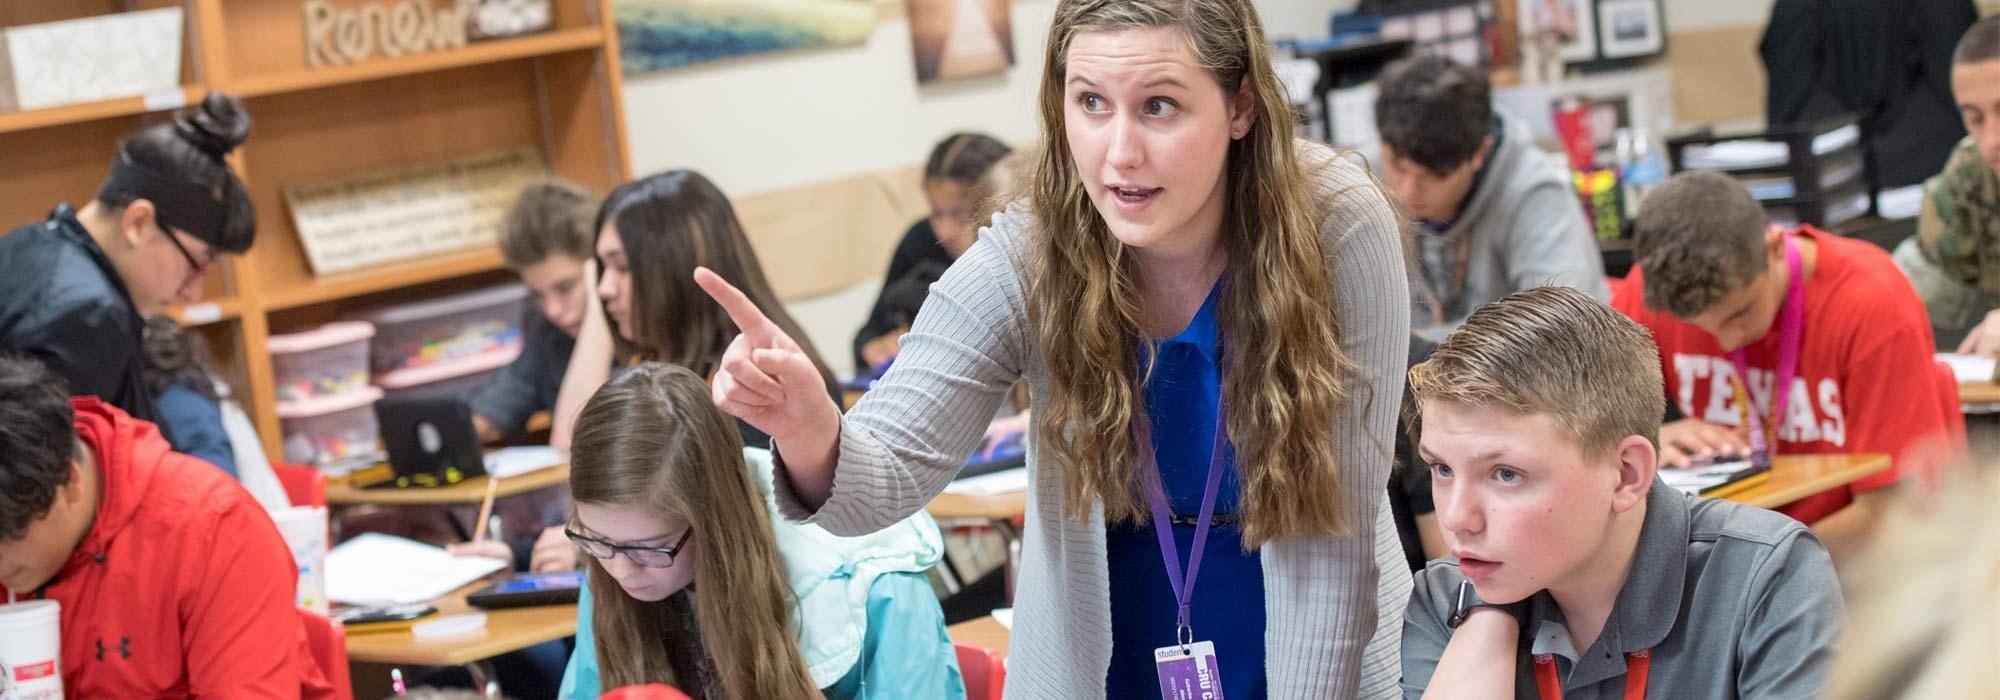 Degree in education student working with middle school students through UMHB teacher education program.